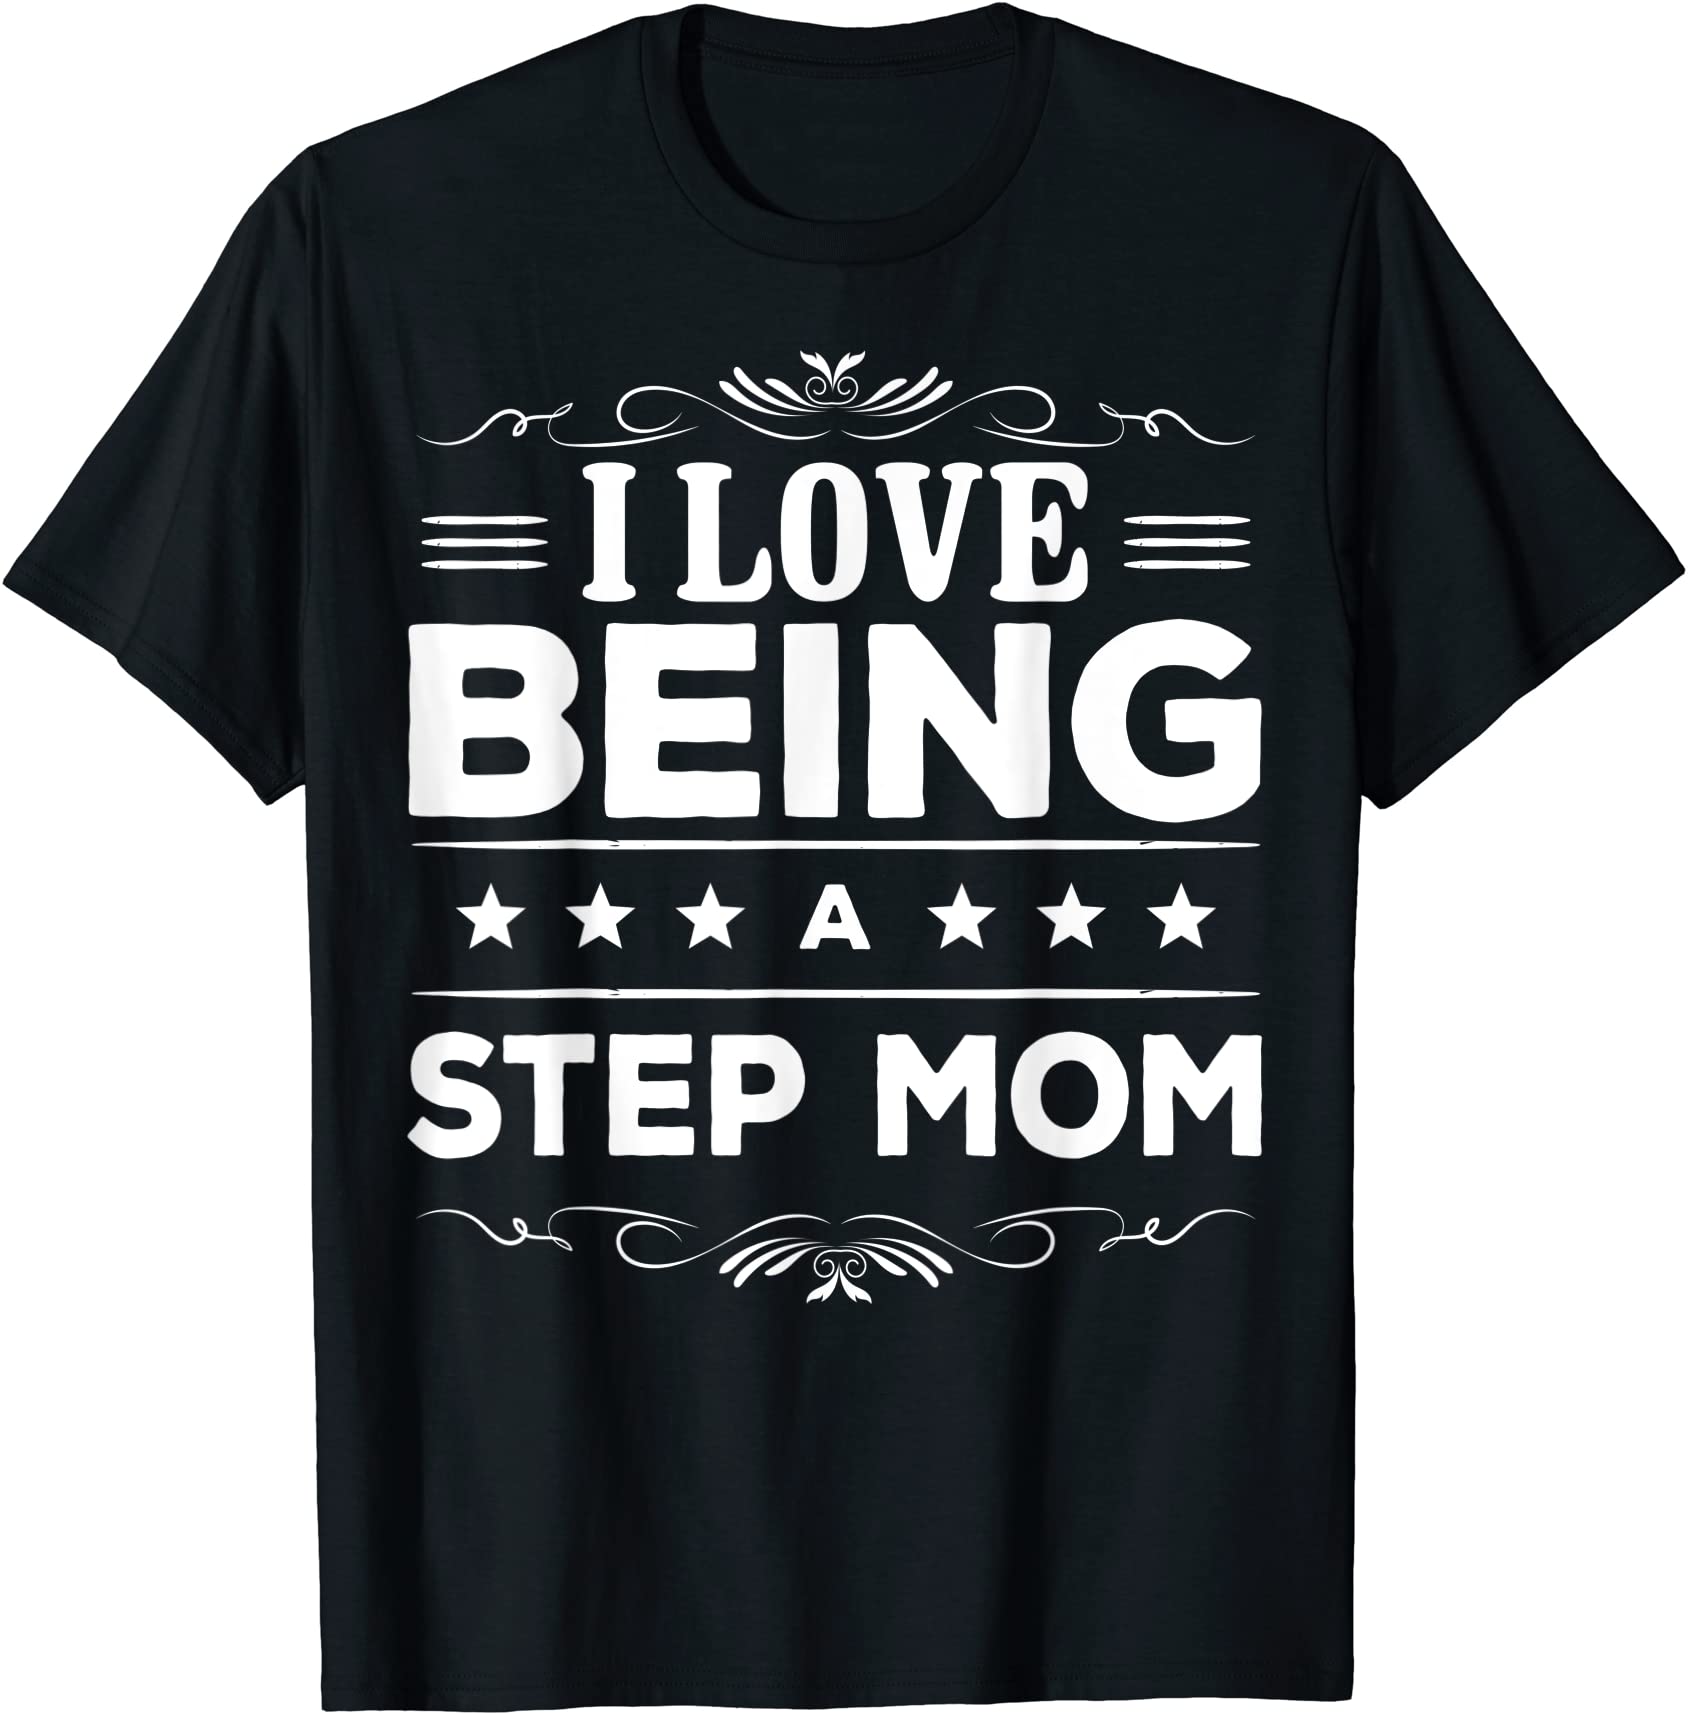 i love being a step mom gift for step mom t shirt men - Buy t-shirt designs